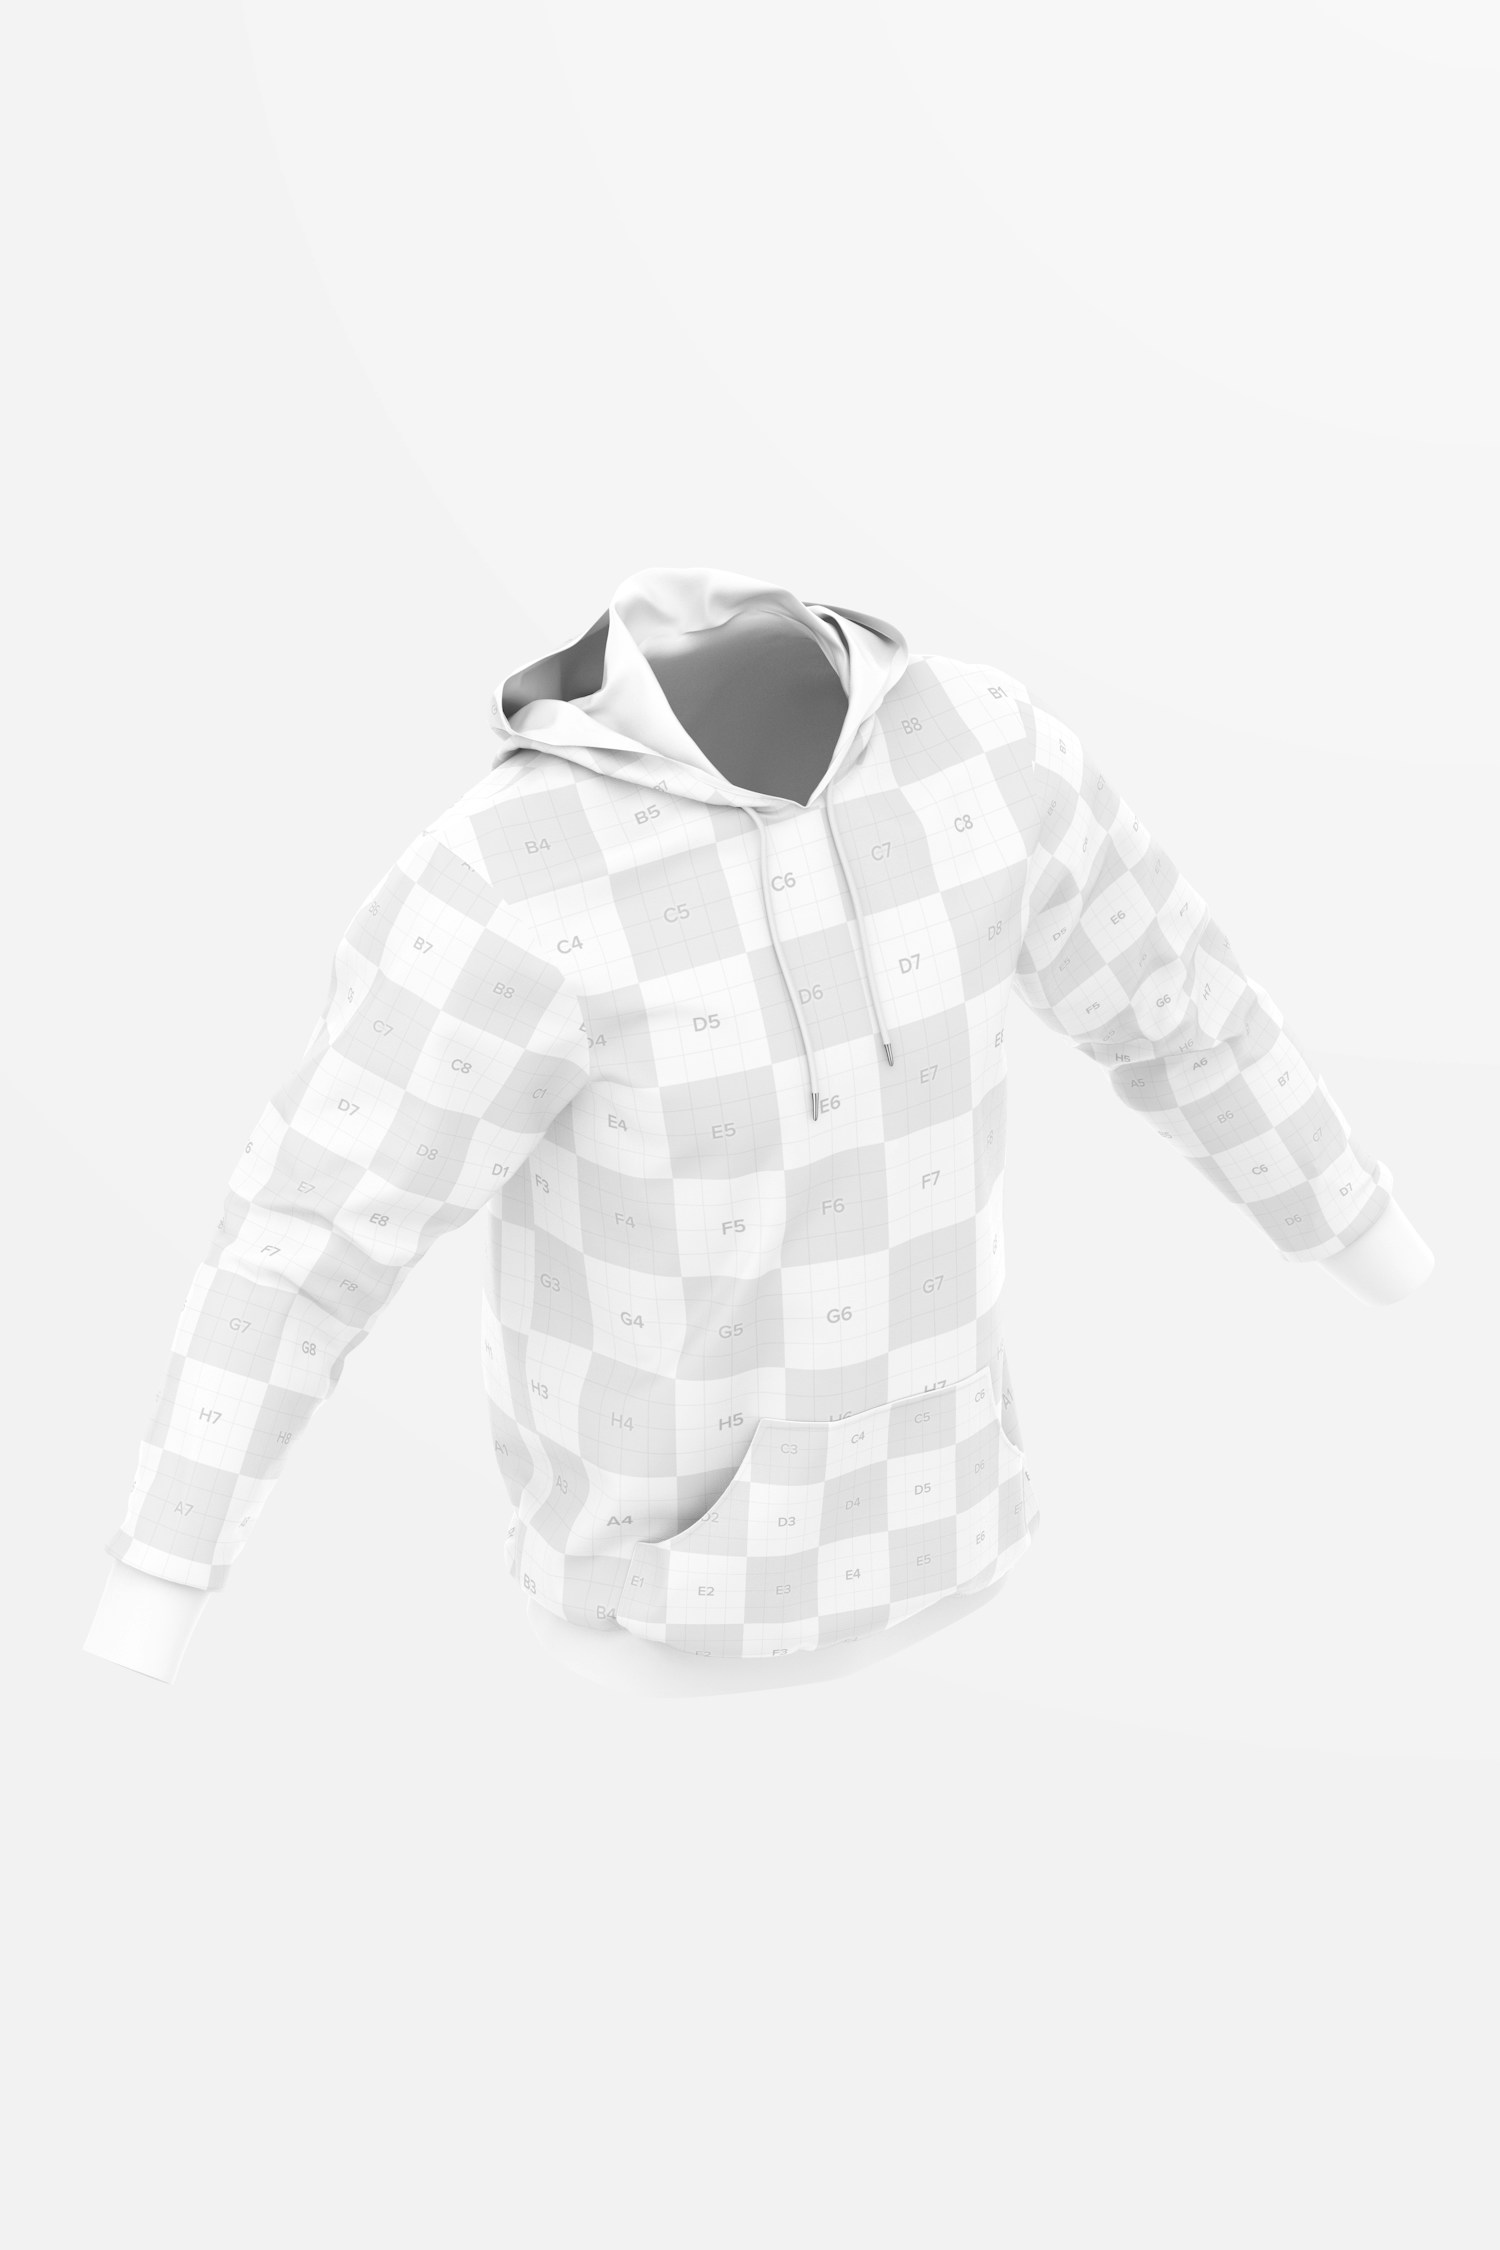 Hoodie Mockup, Isometric Right View